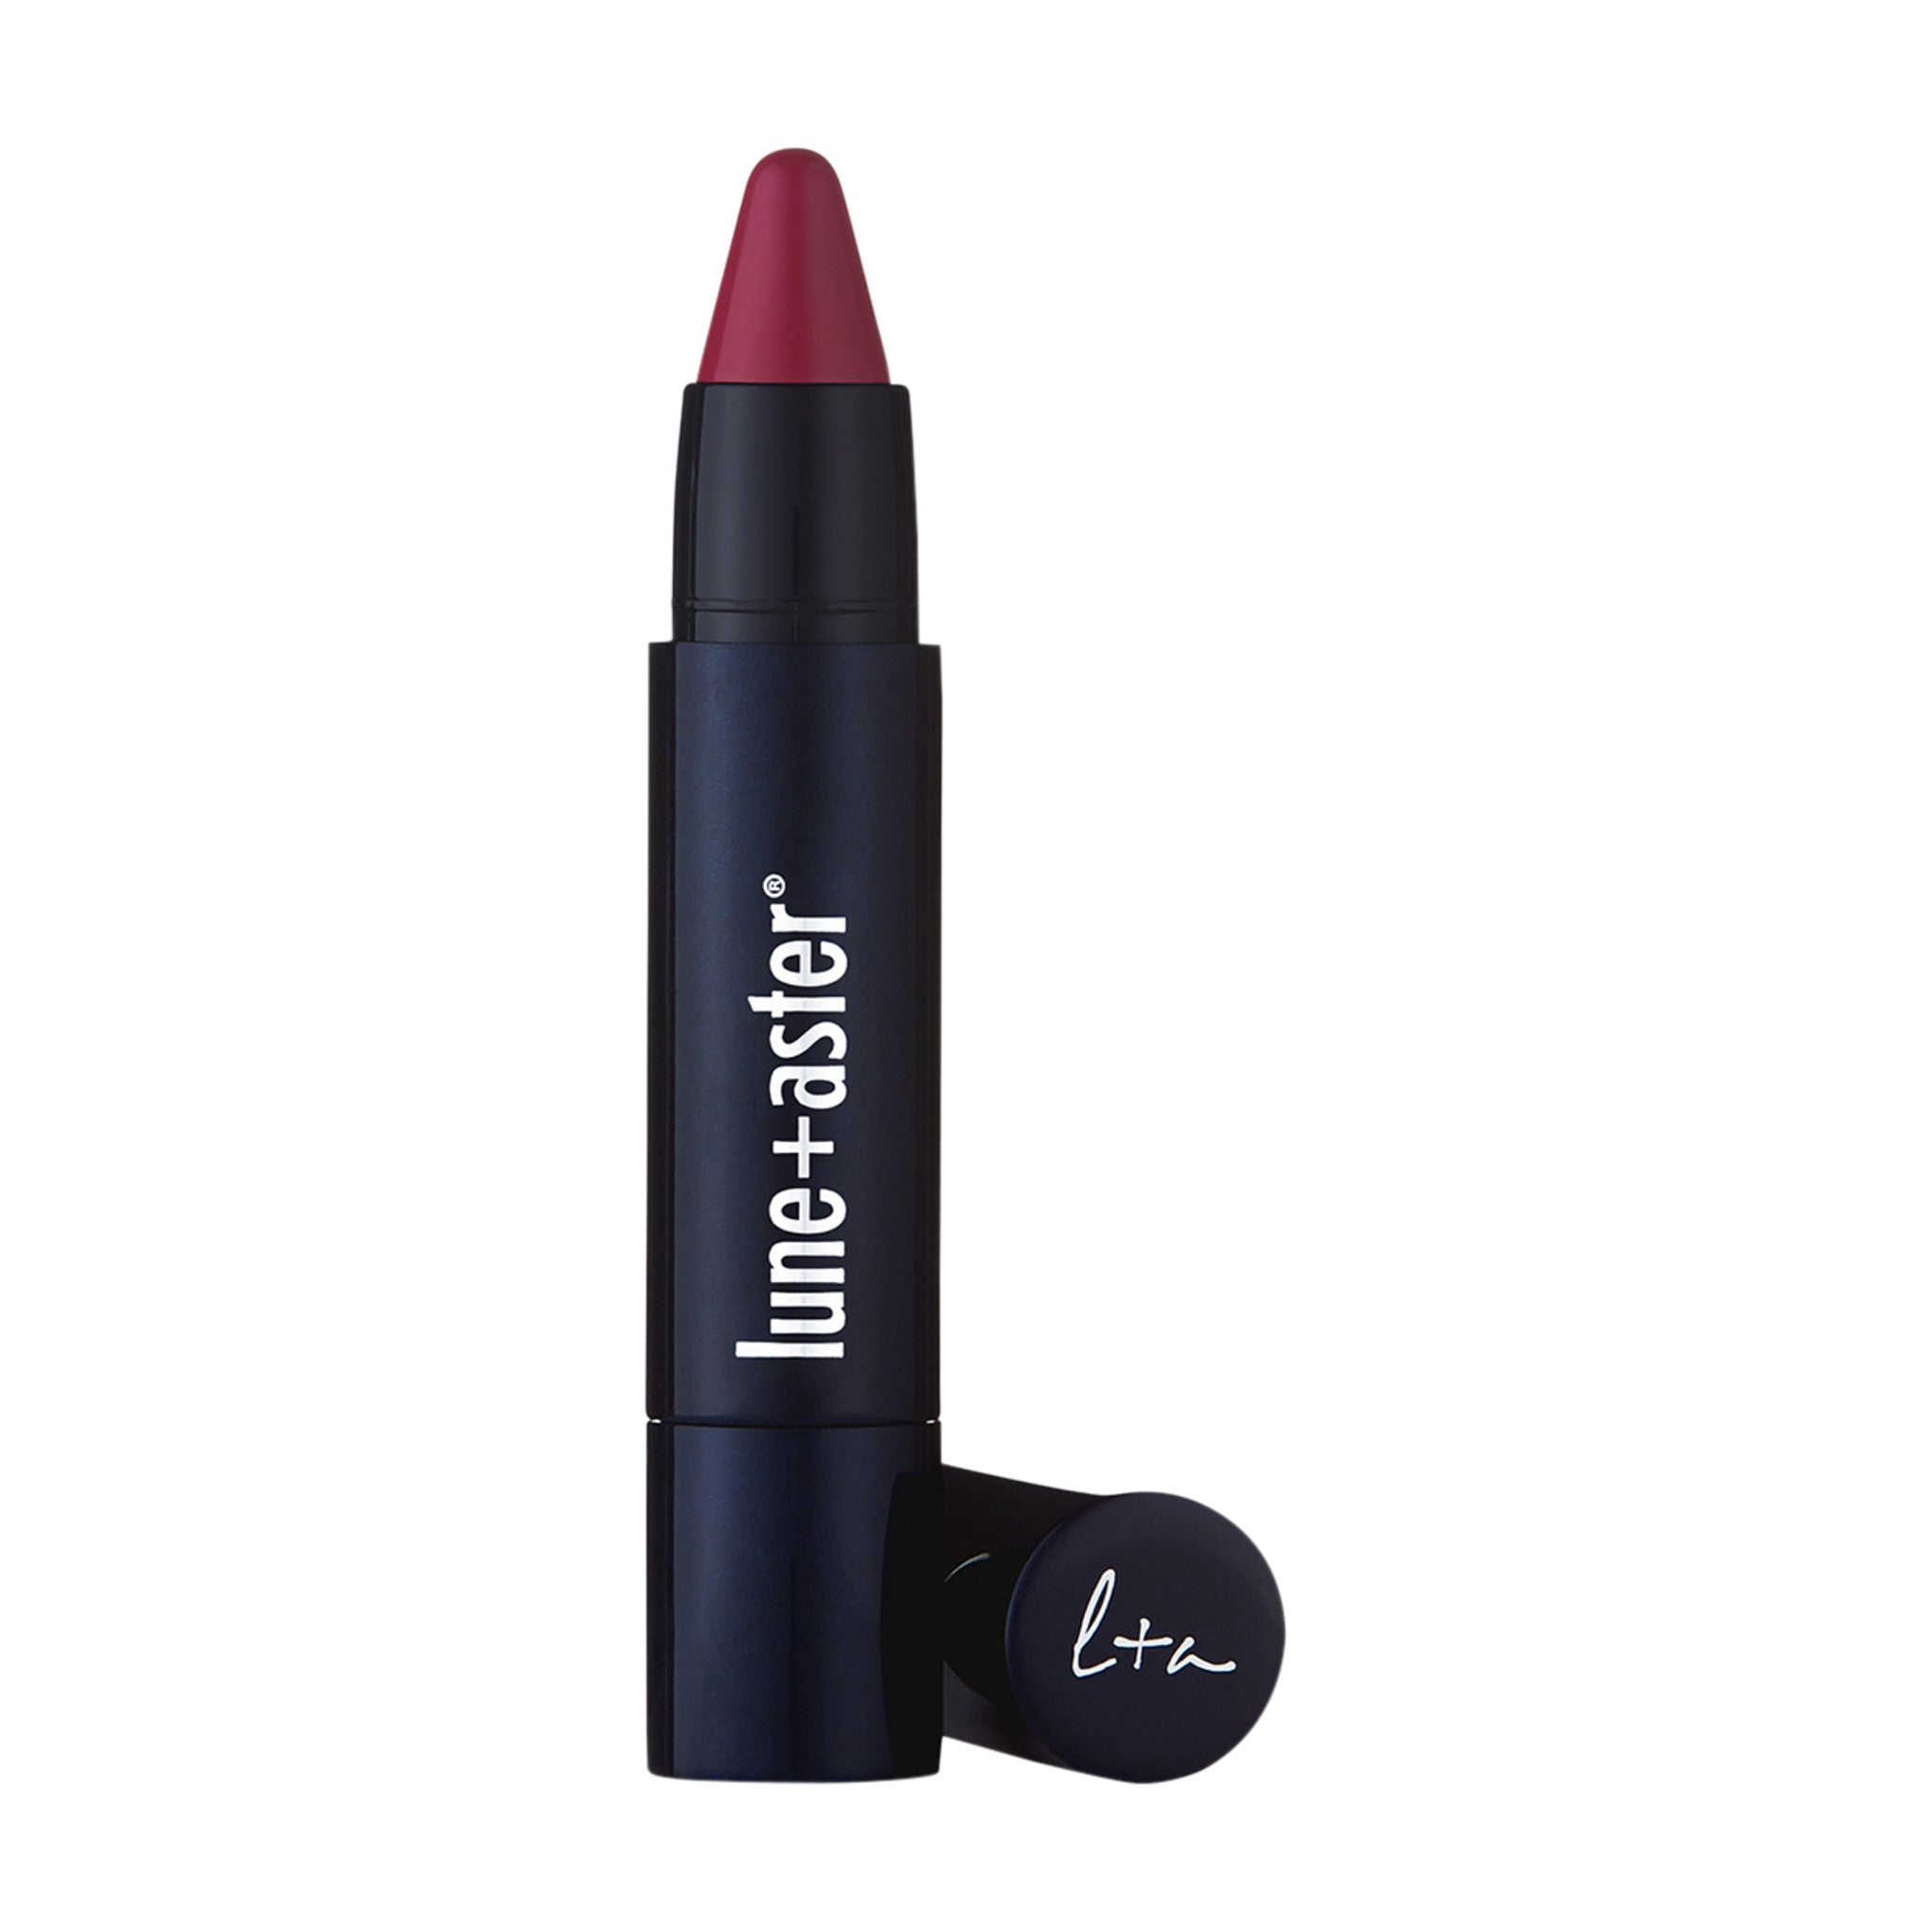 Lune+Aster PowerLips QuickStick Color/Shade variant: Livestream main image. This product is in the color pink